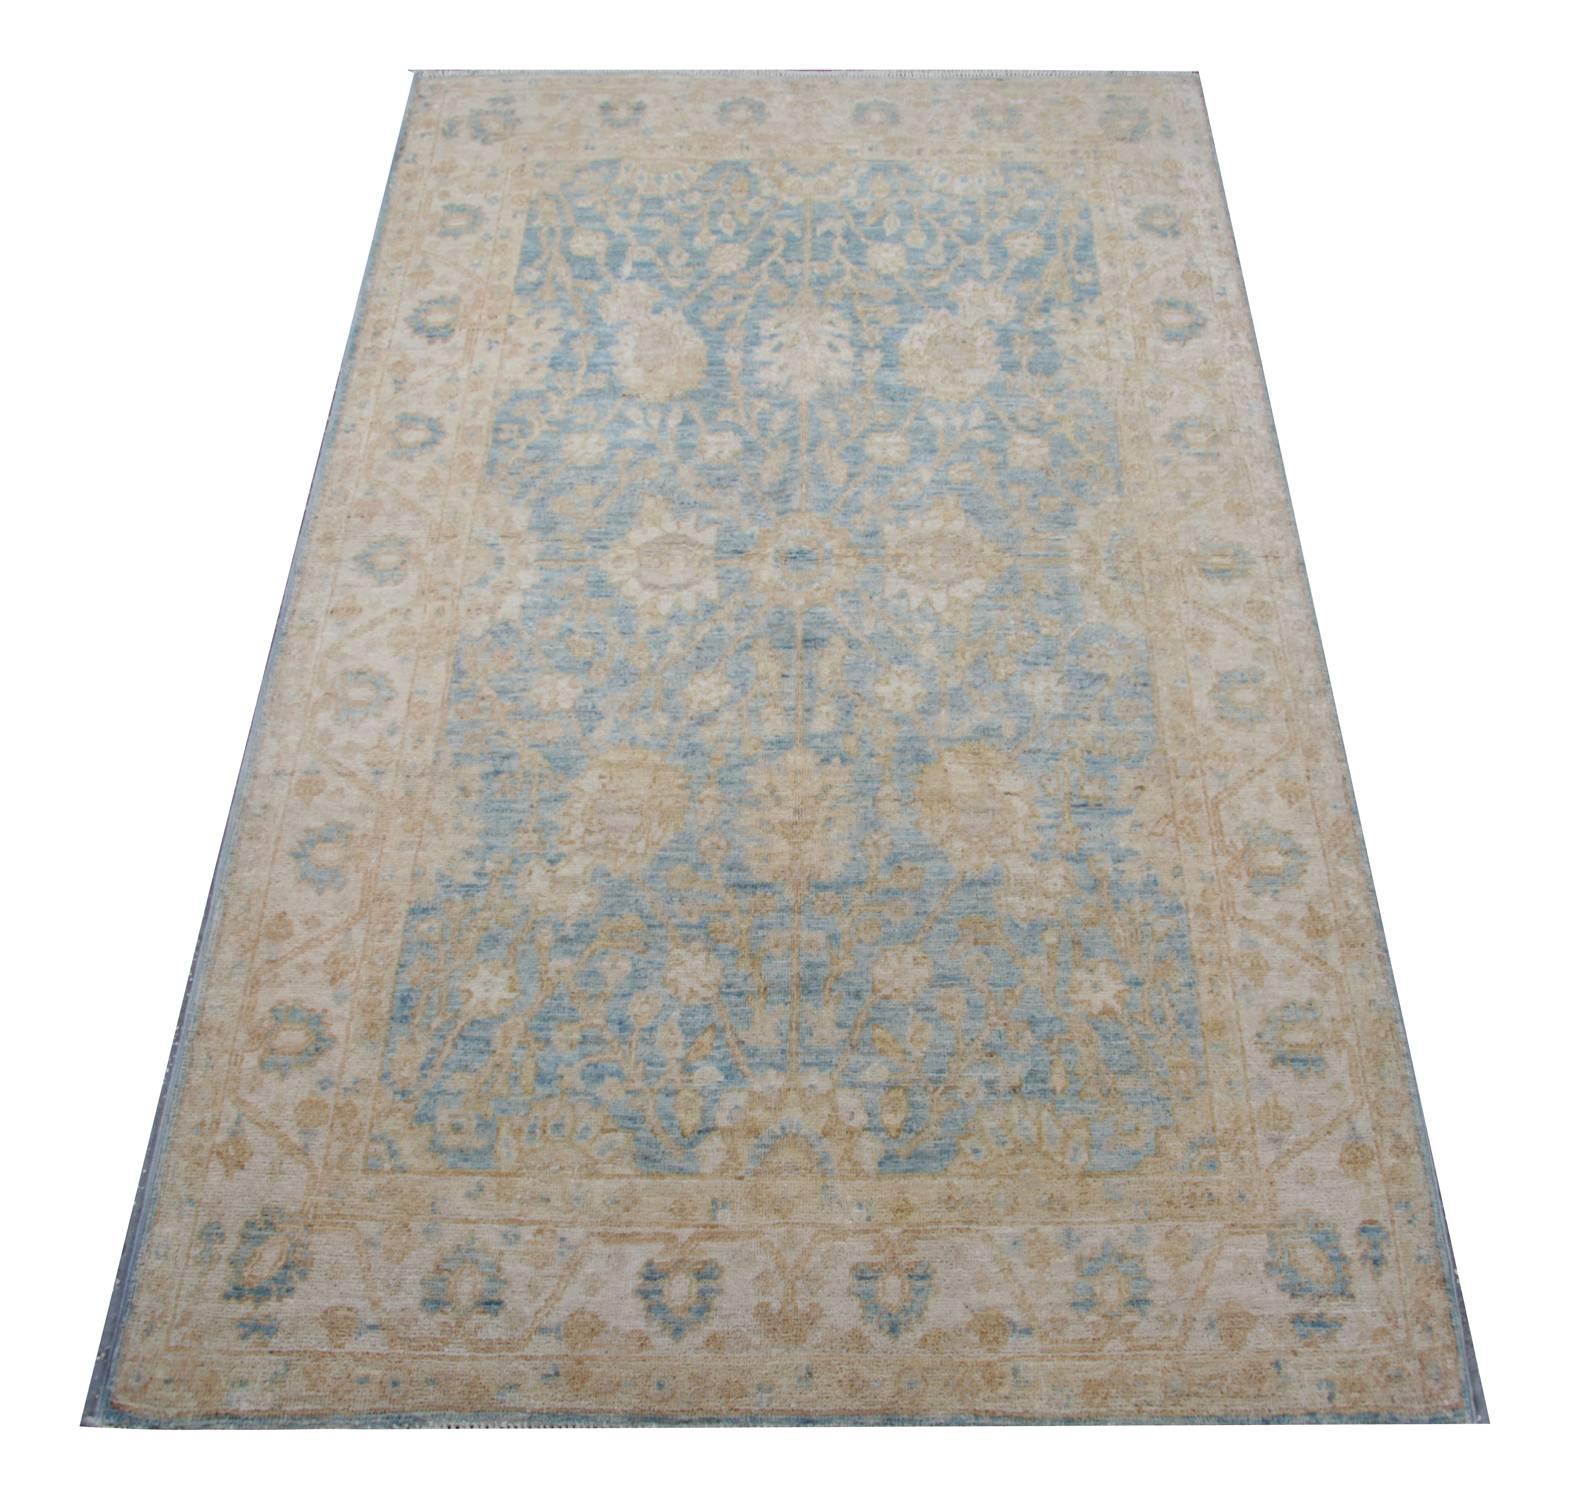 These Ziegler Sultanabad Persian-style rugs are made on our own looms by our master weavers in Afghanistan. These small rugs are made with all-natural vegetable dyes, and they are all hand-spun wool rugs. These rugs have a large-scale design that